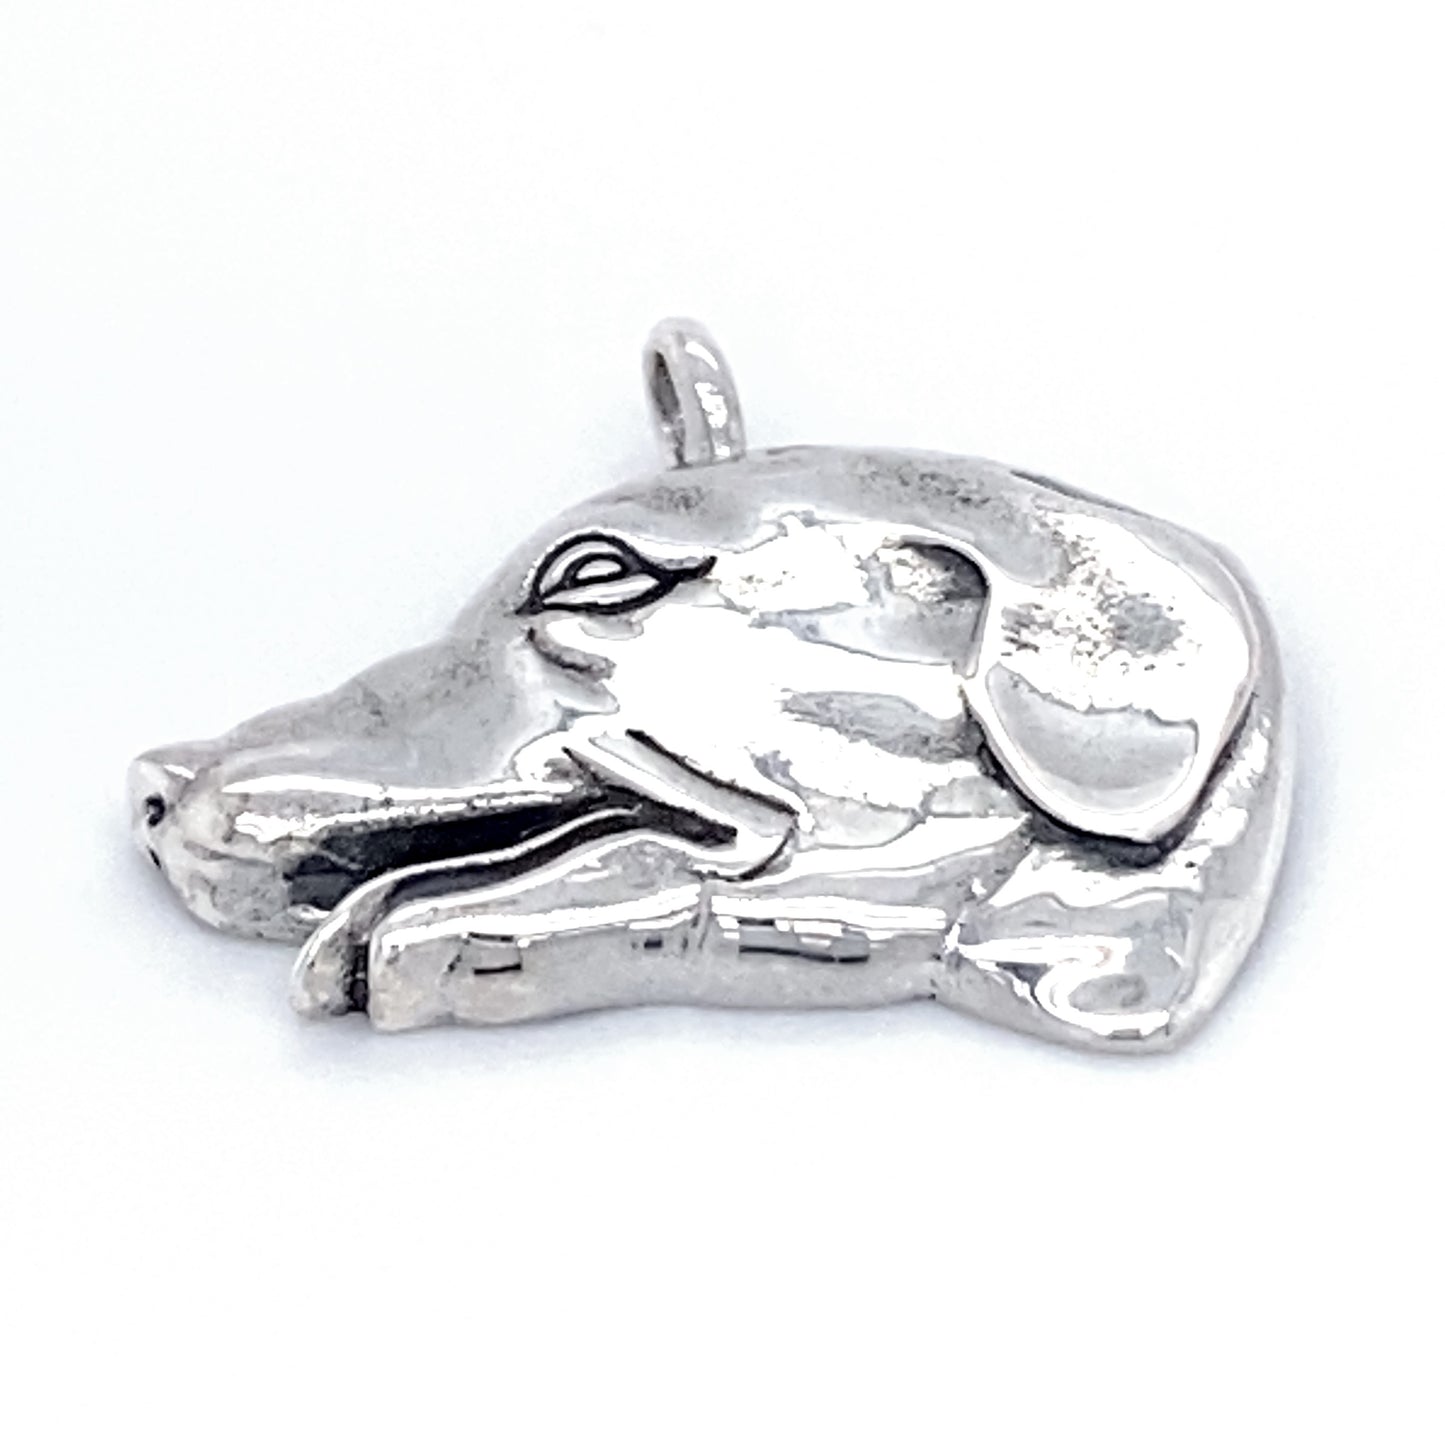 A Dog Head Pendant shaped like a dog's head, featuring a loop at the top for attaching to a necklace or chain. This beautiful dog charm makes an ideal dog lover gift.